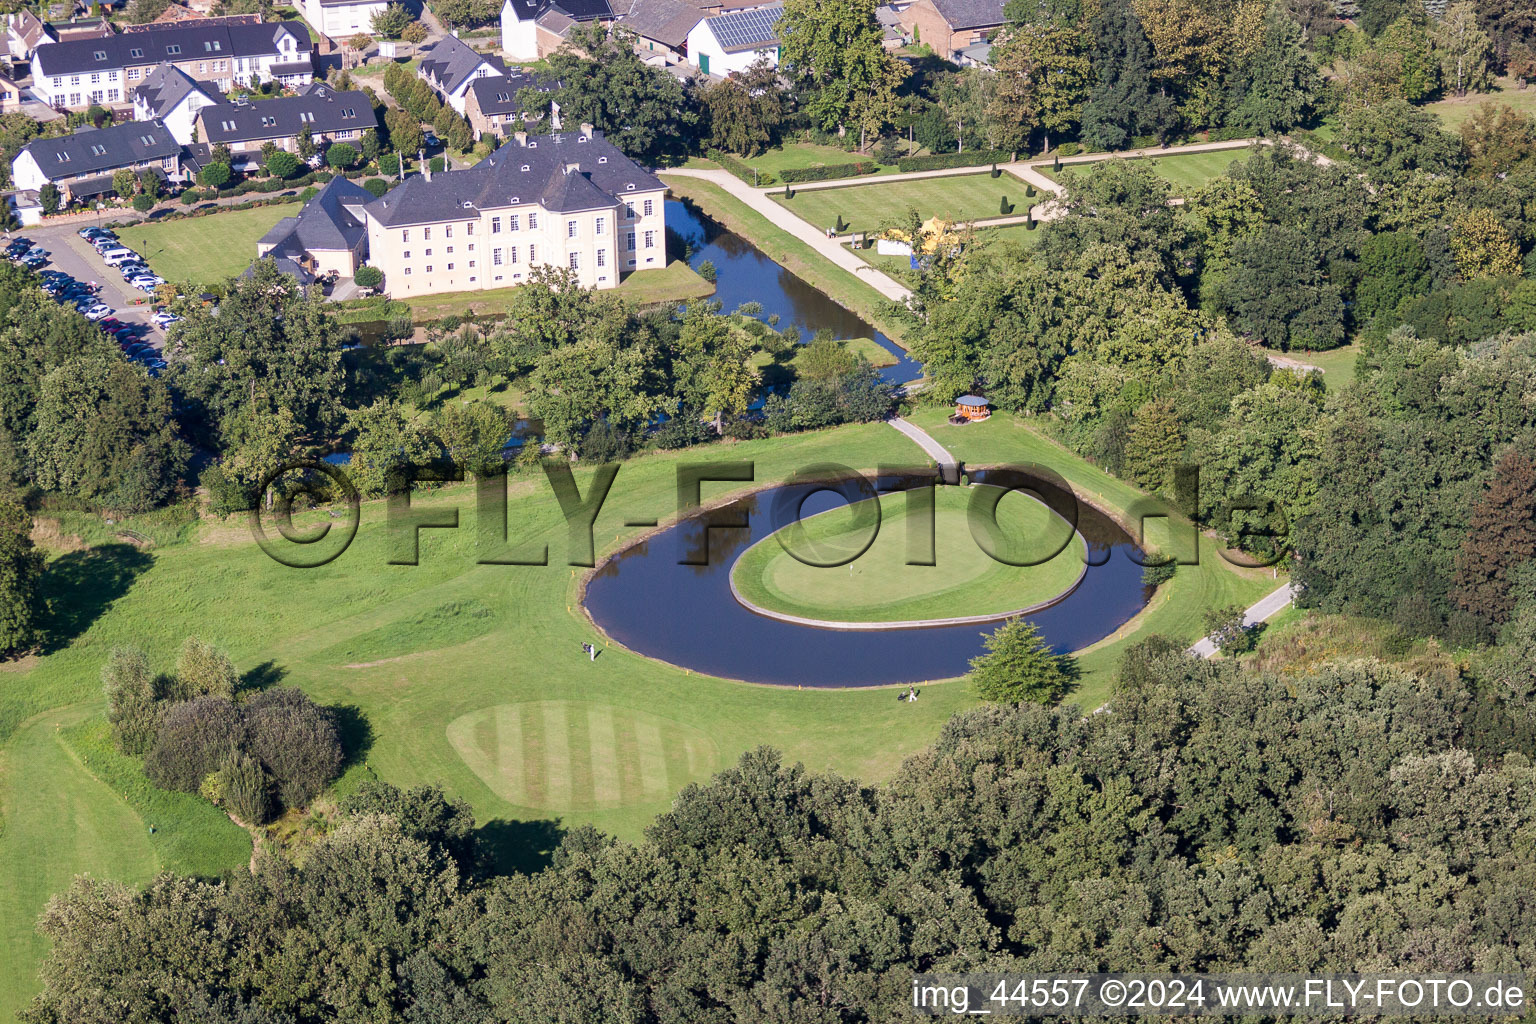 Grounds of the Golf course at Golf Club Schloss Miel in the district Miel in Swisttal in the state North Rhine-Westphalia, Germany from above